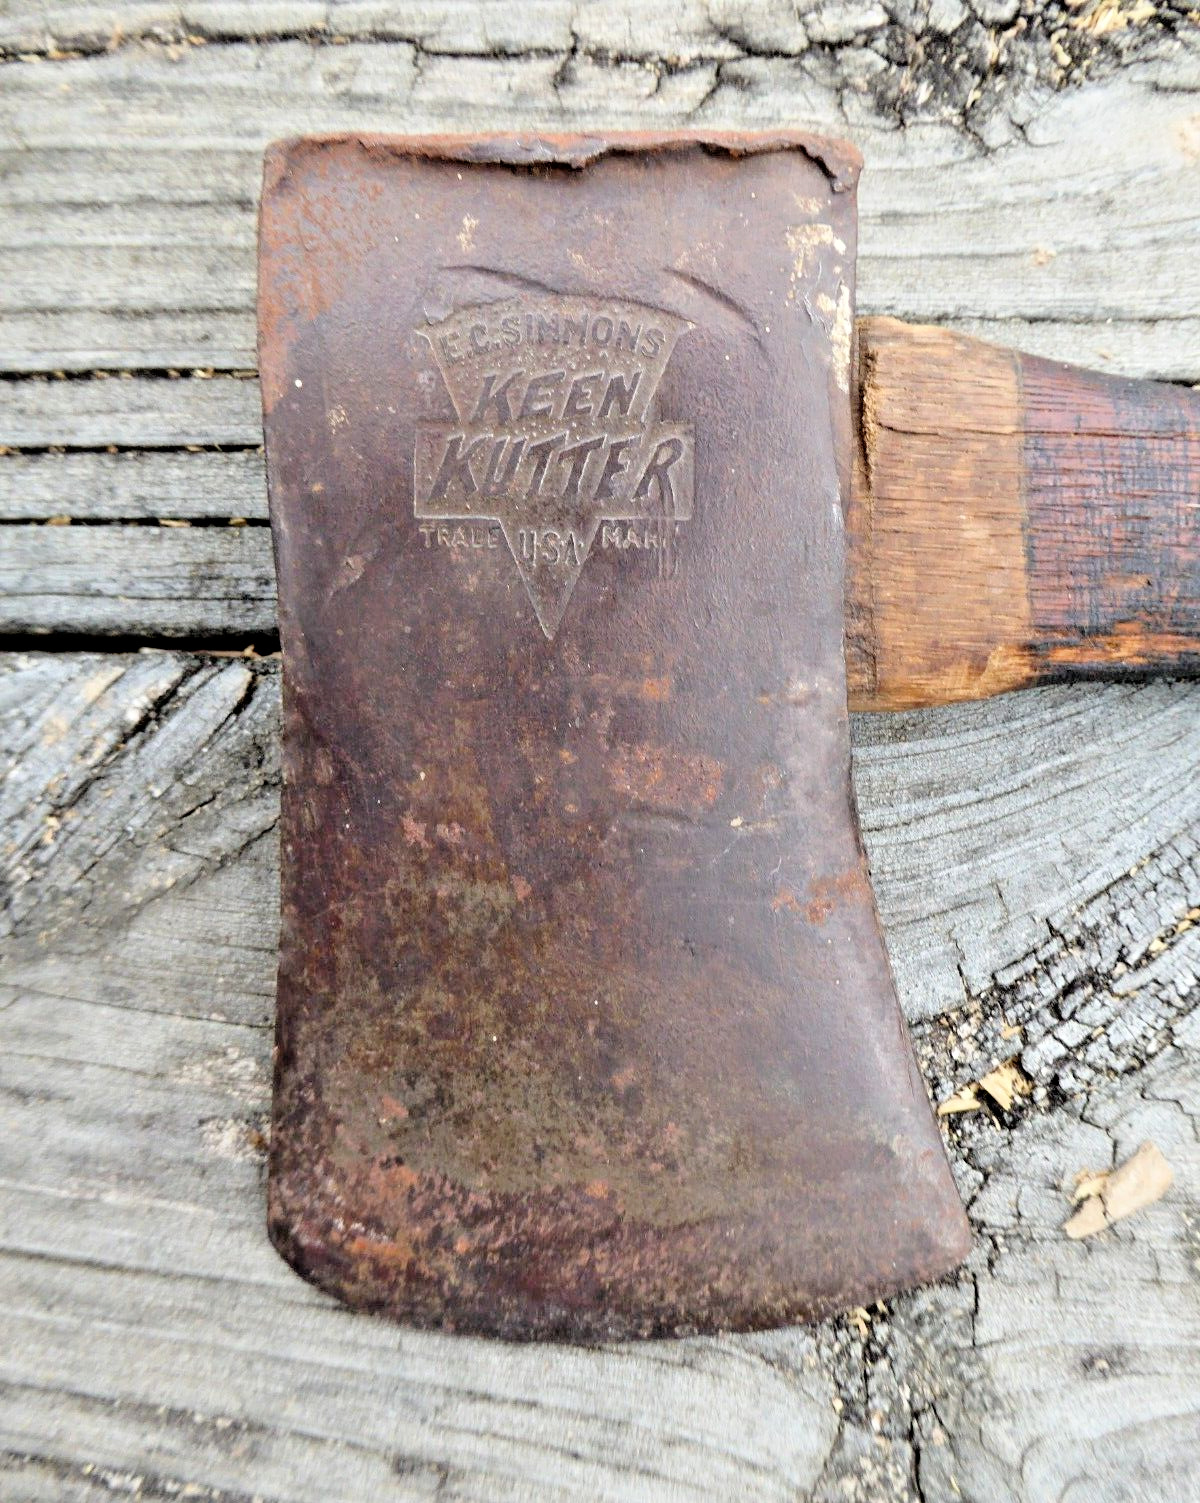 Antique Early Large Label E. C. SIMMONS KEEN KUTTER HATCHET MADE IN USA Axe